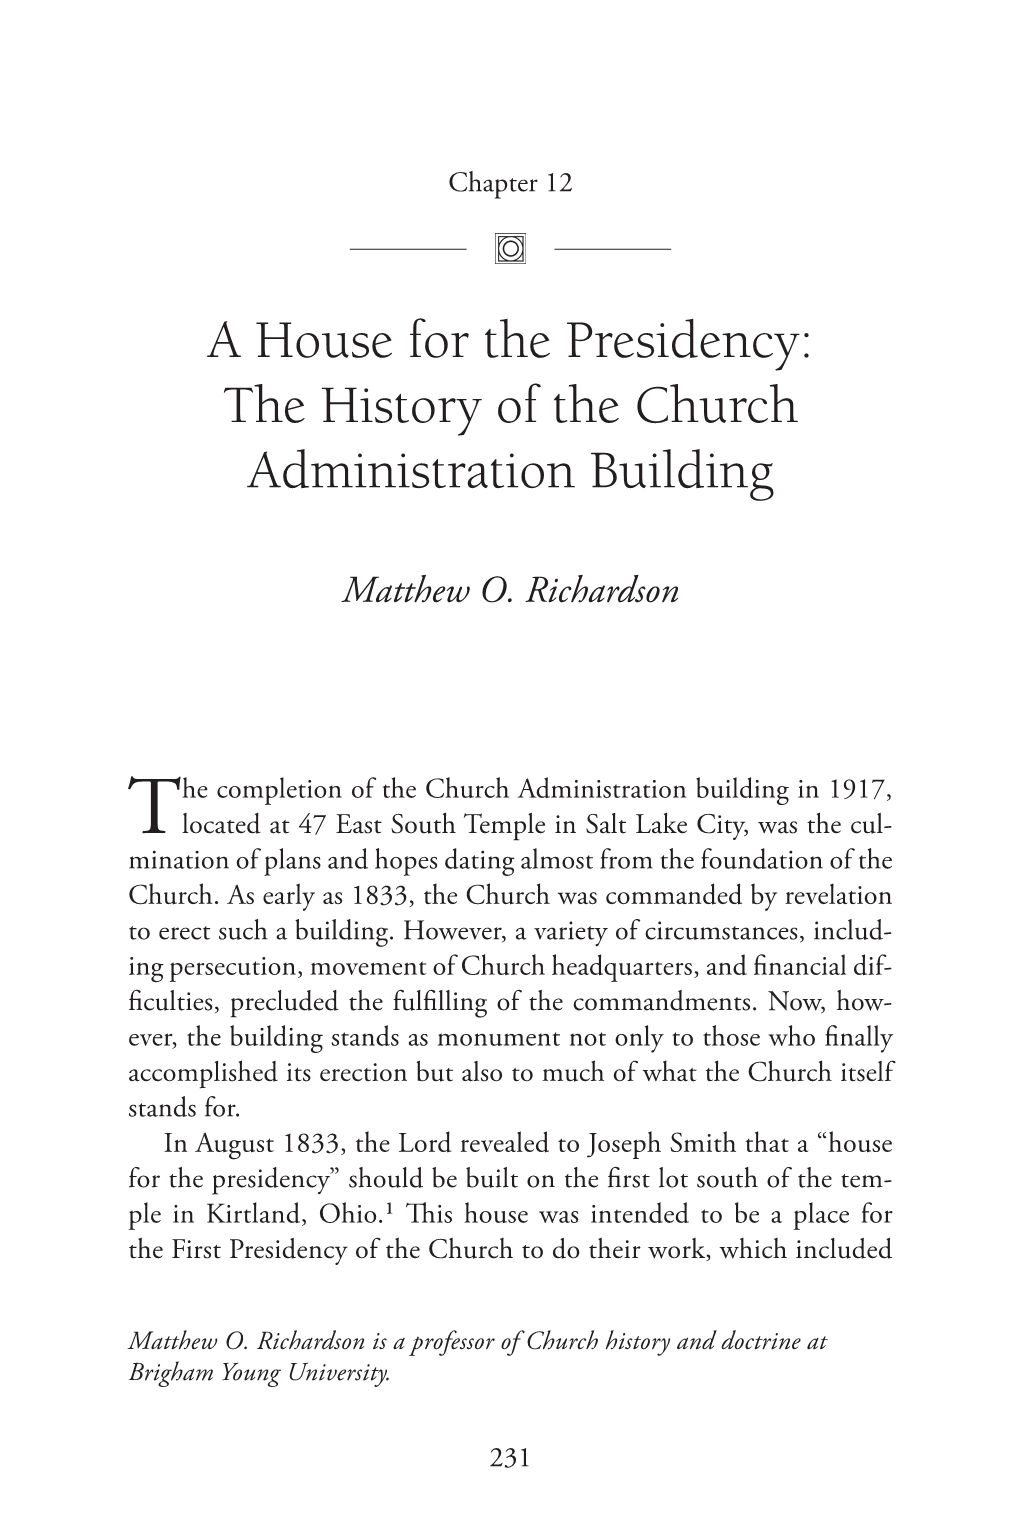 A House for the Presidency: the History of the Church Administration Building